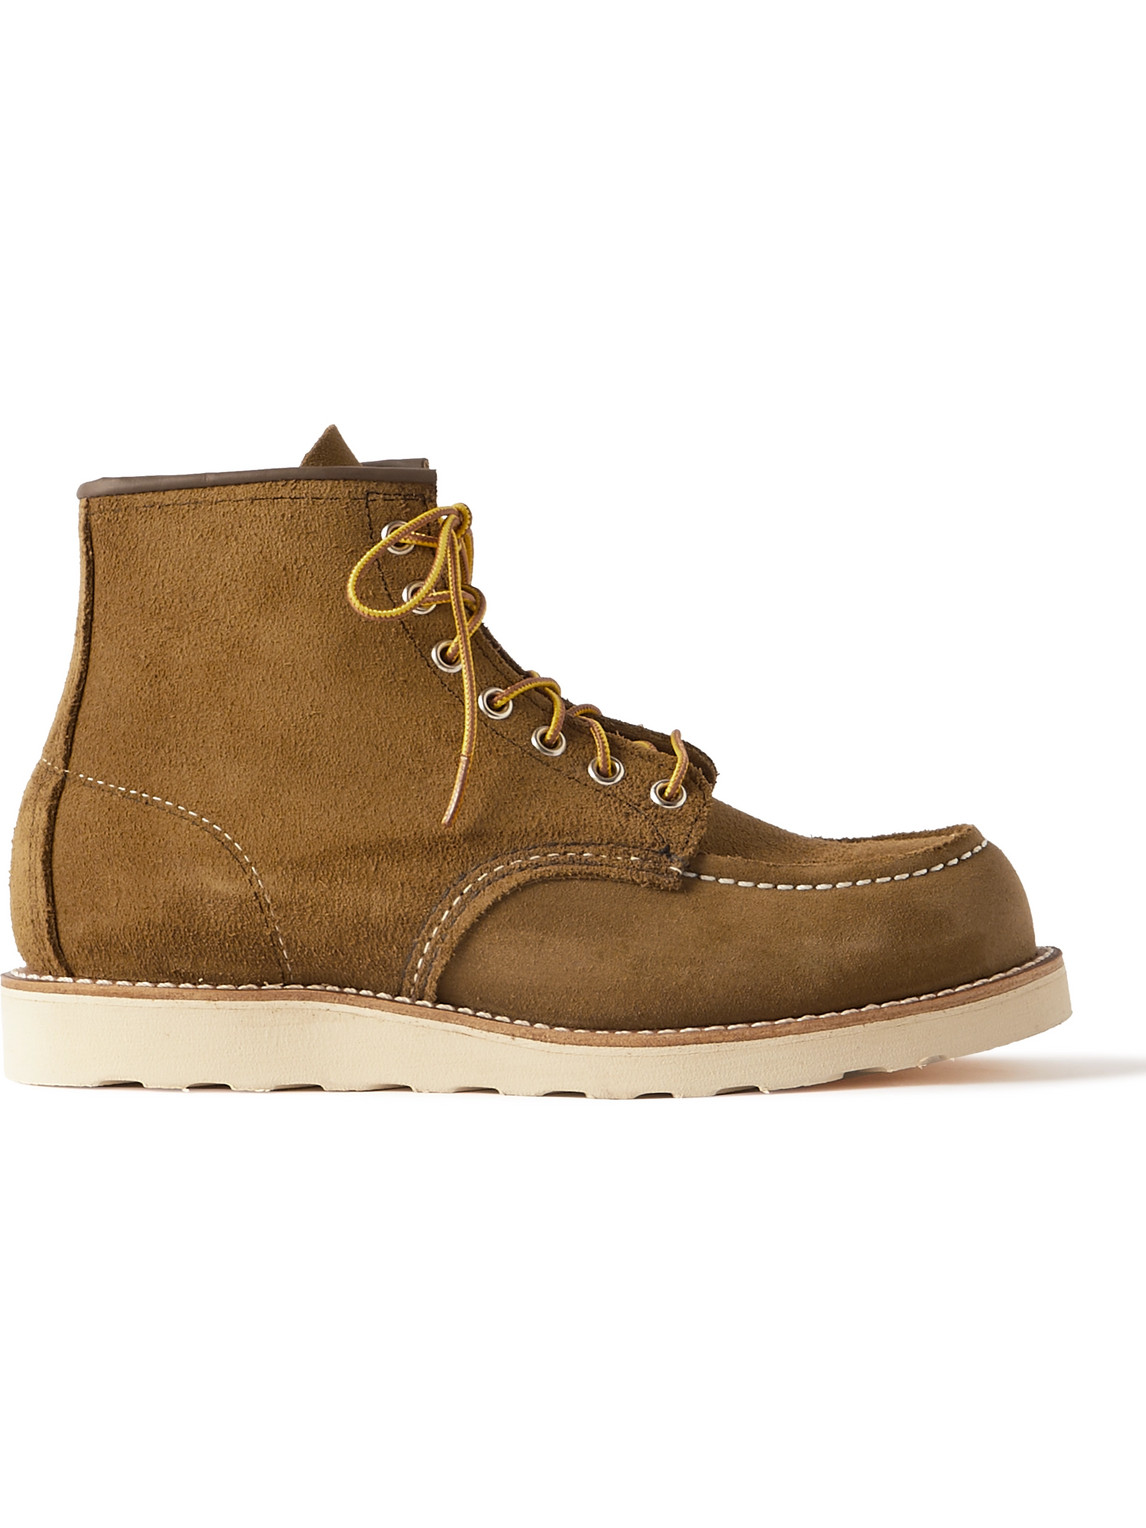 6-Inch Hawthorne Suede Boots